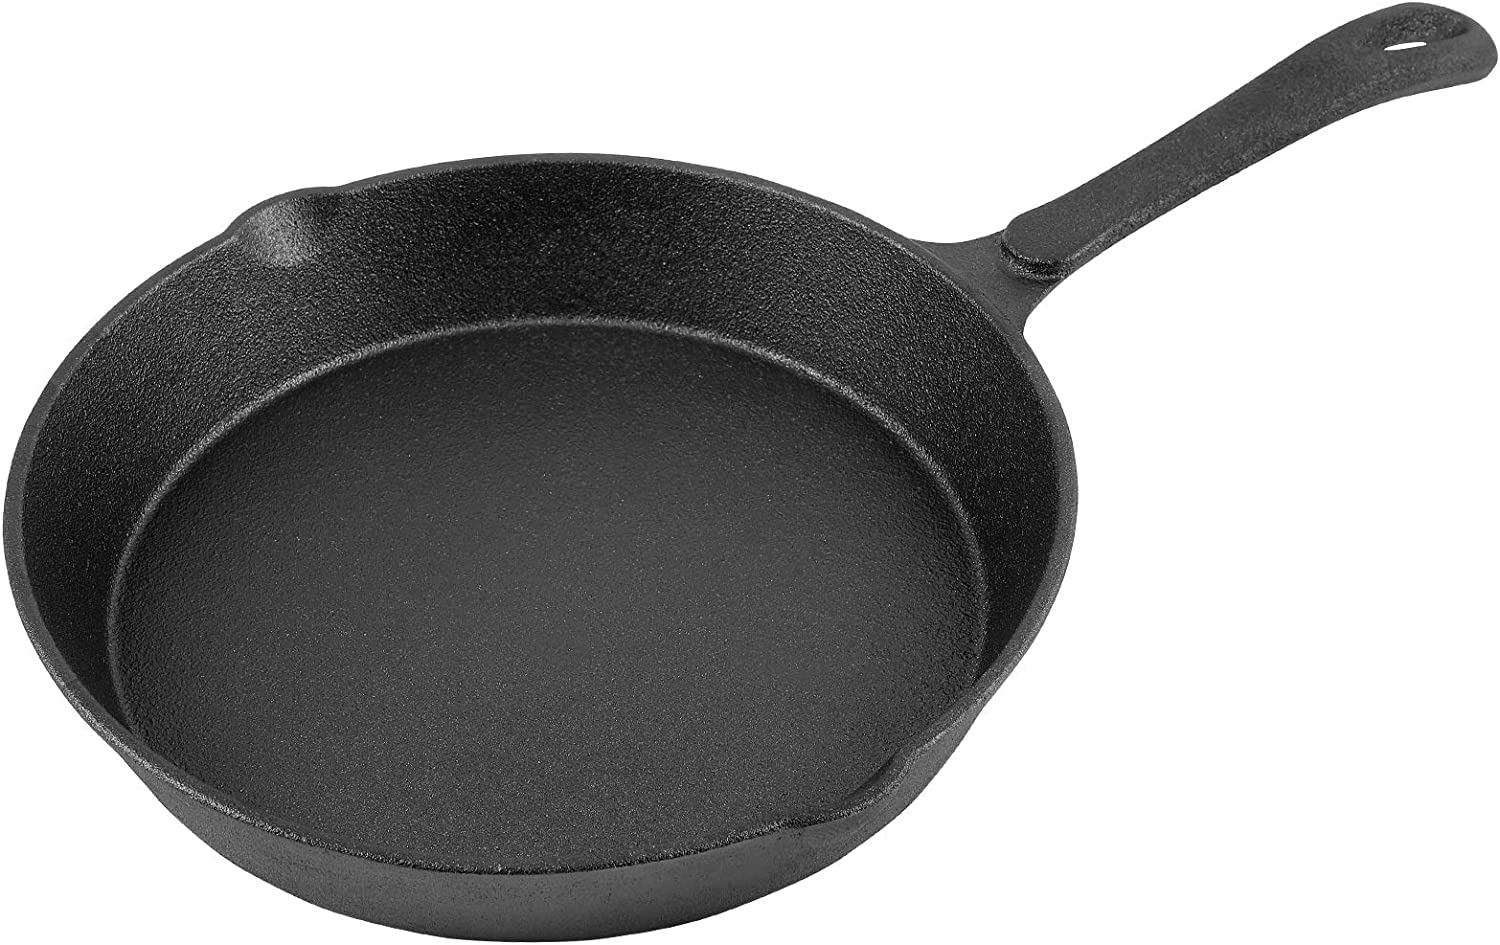 6 Inch Cast Iron Skillet Pan Small Frying Pan, Pre-Seasoned for